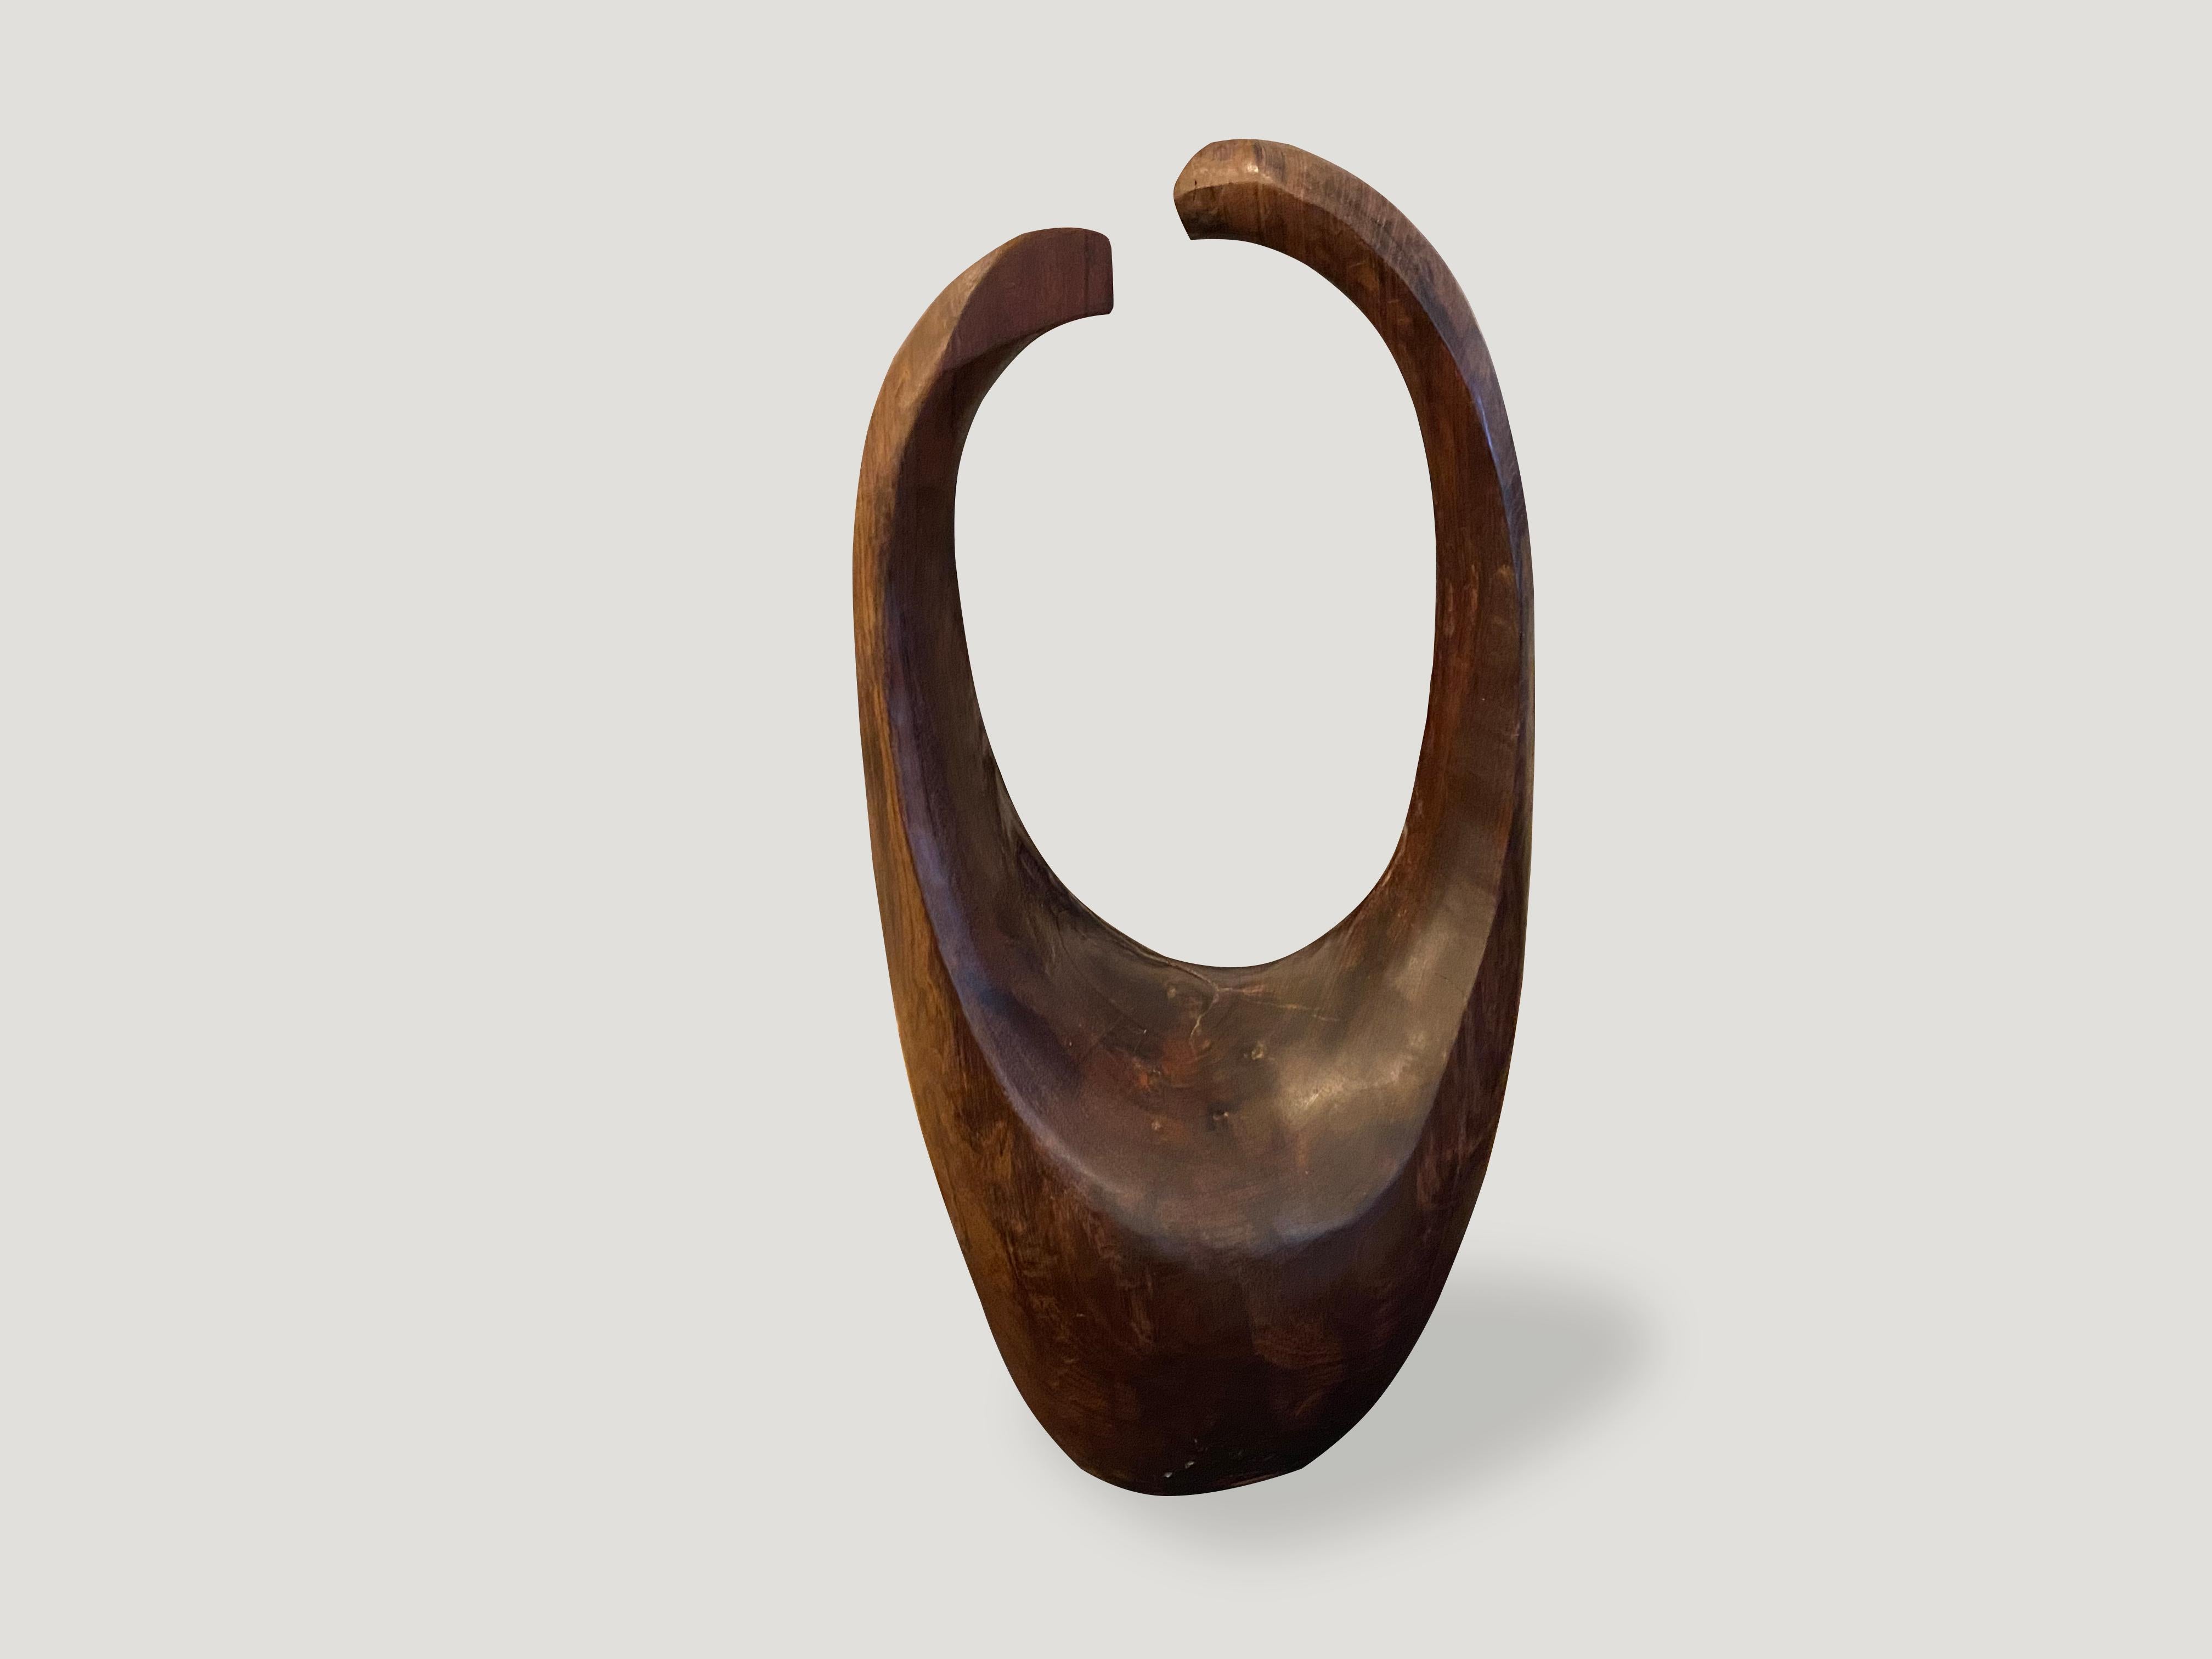 Minimalist sculpture hand carved from a single sono wood block.

Andrianna Shamaris. The Leader In Modern Organic Design.